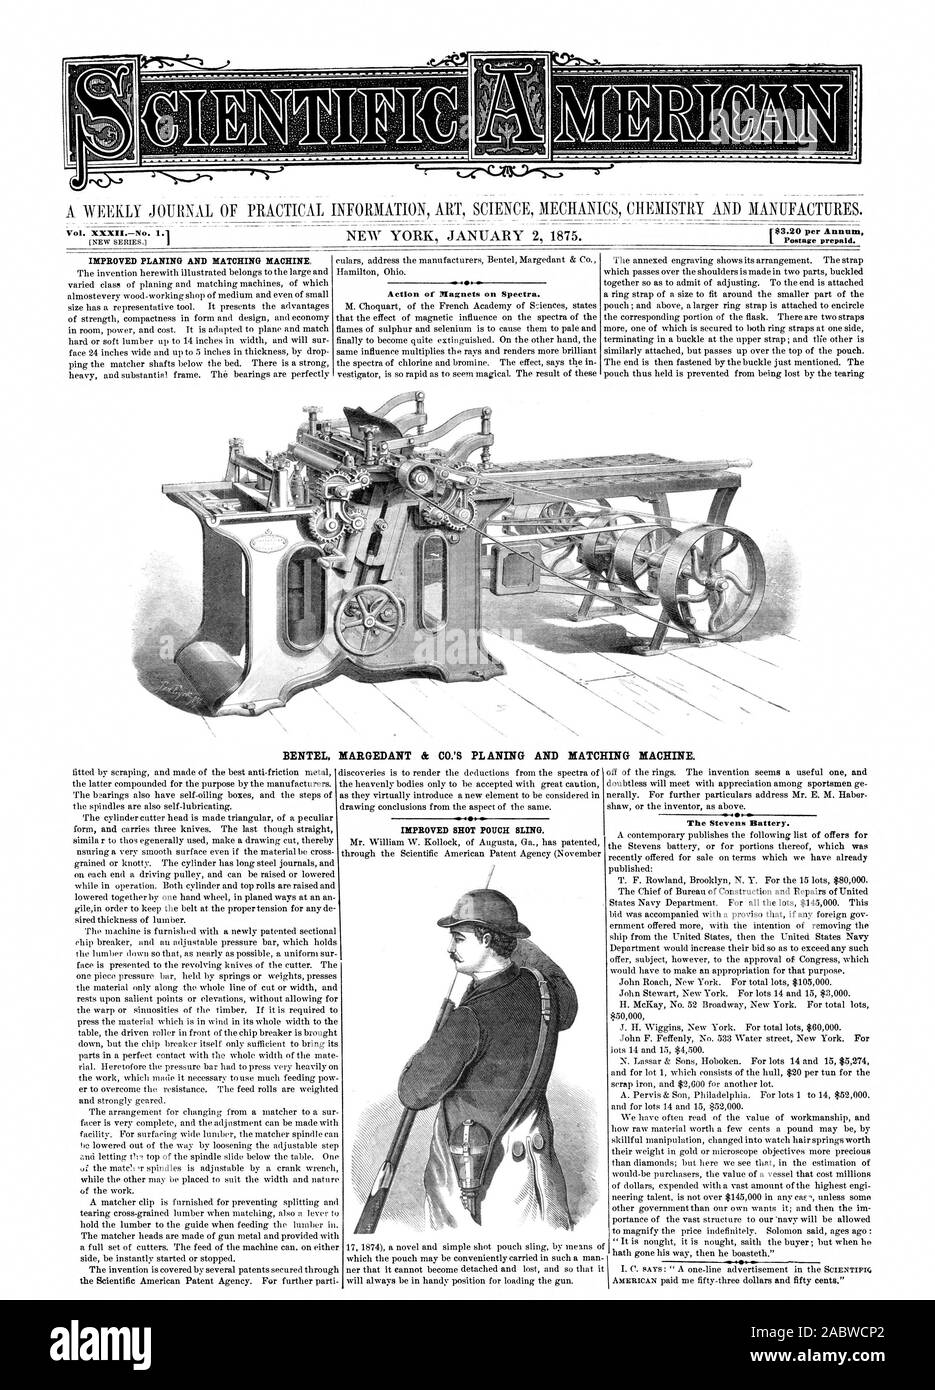 r$3.20 per Annum Action of Magnets on Spectra. BENTEL MARGEDANT & CO.'S PLANING AND MATCHING MACHINE. The Stevens Battery., scientific american, 1875-01-02 Stock Photo